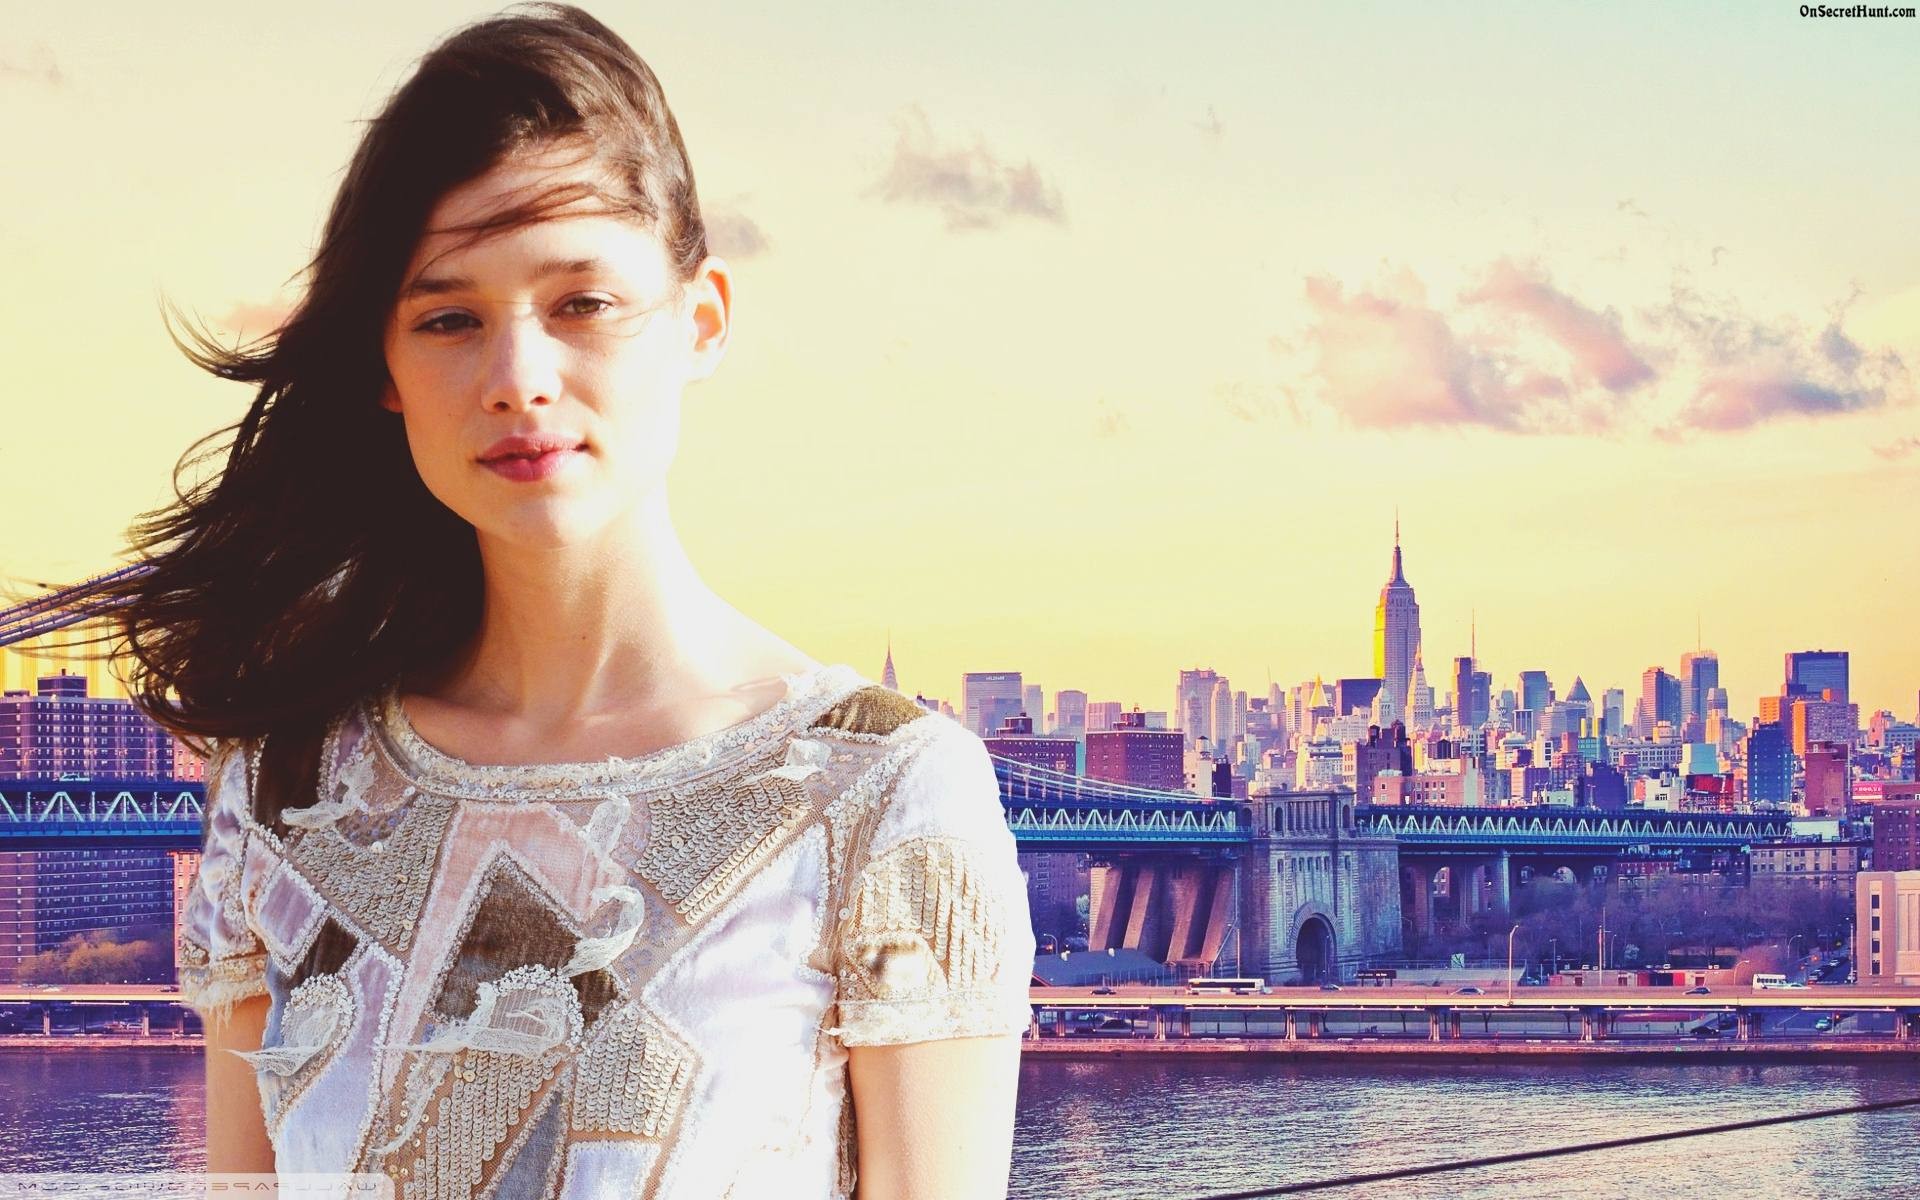 Women Astrid Berges Frisbey Skyline Colorful Windy Brunette Celebrity Actress Empire State Building 1920x1200